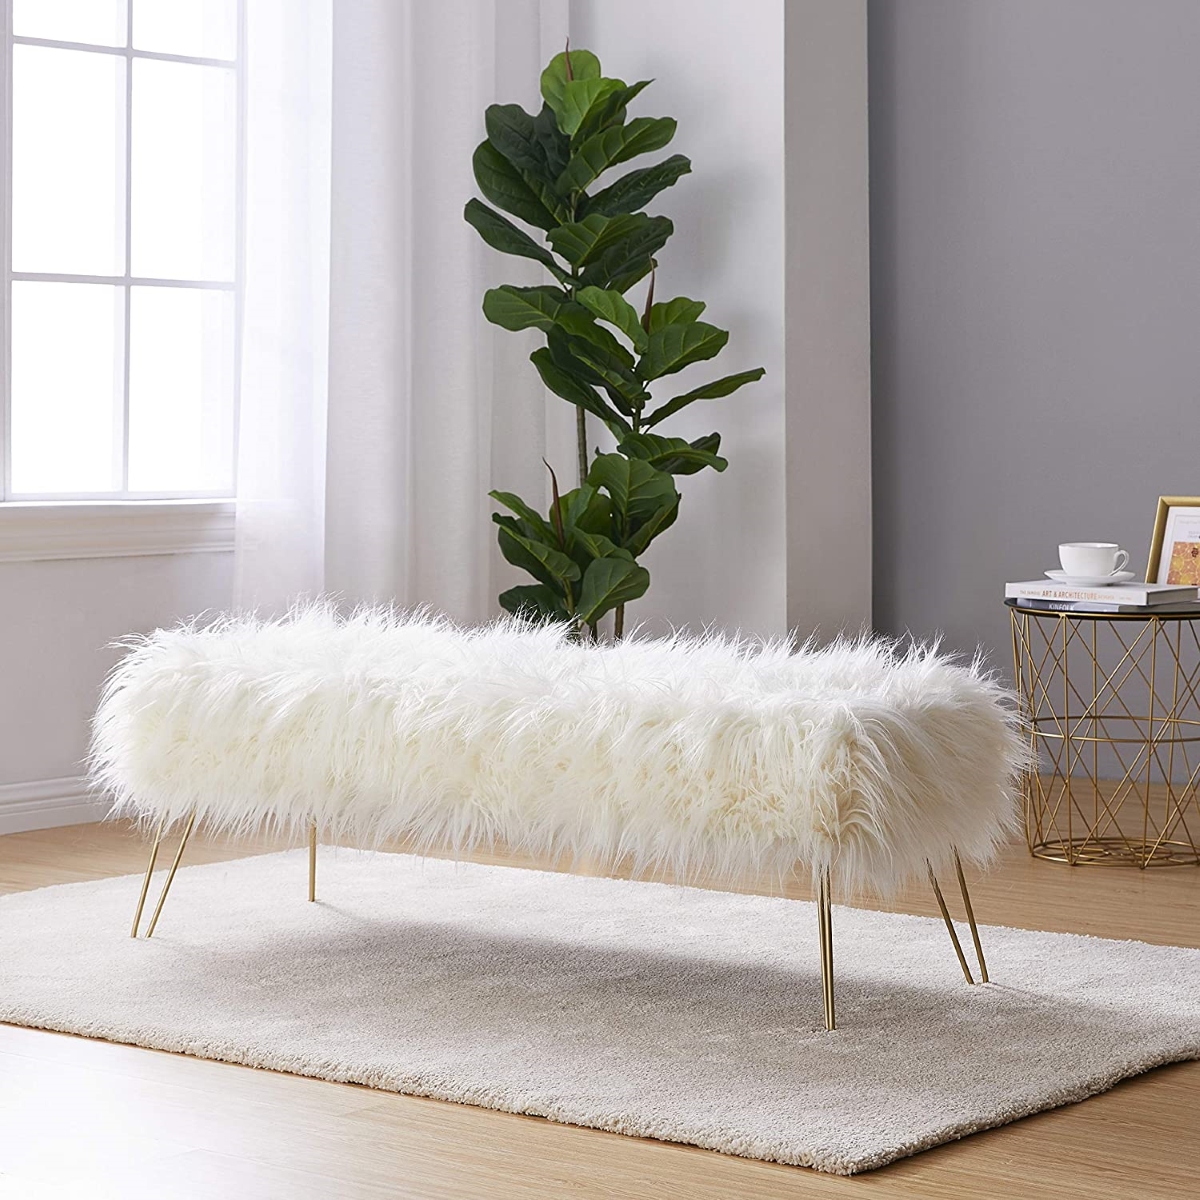 51 Benches That Catch The Eye, Living Room Bench Seat